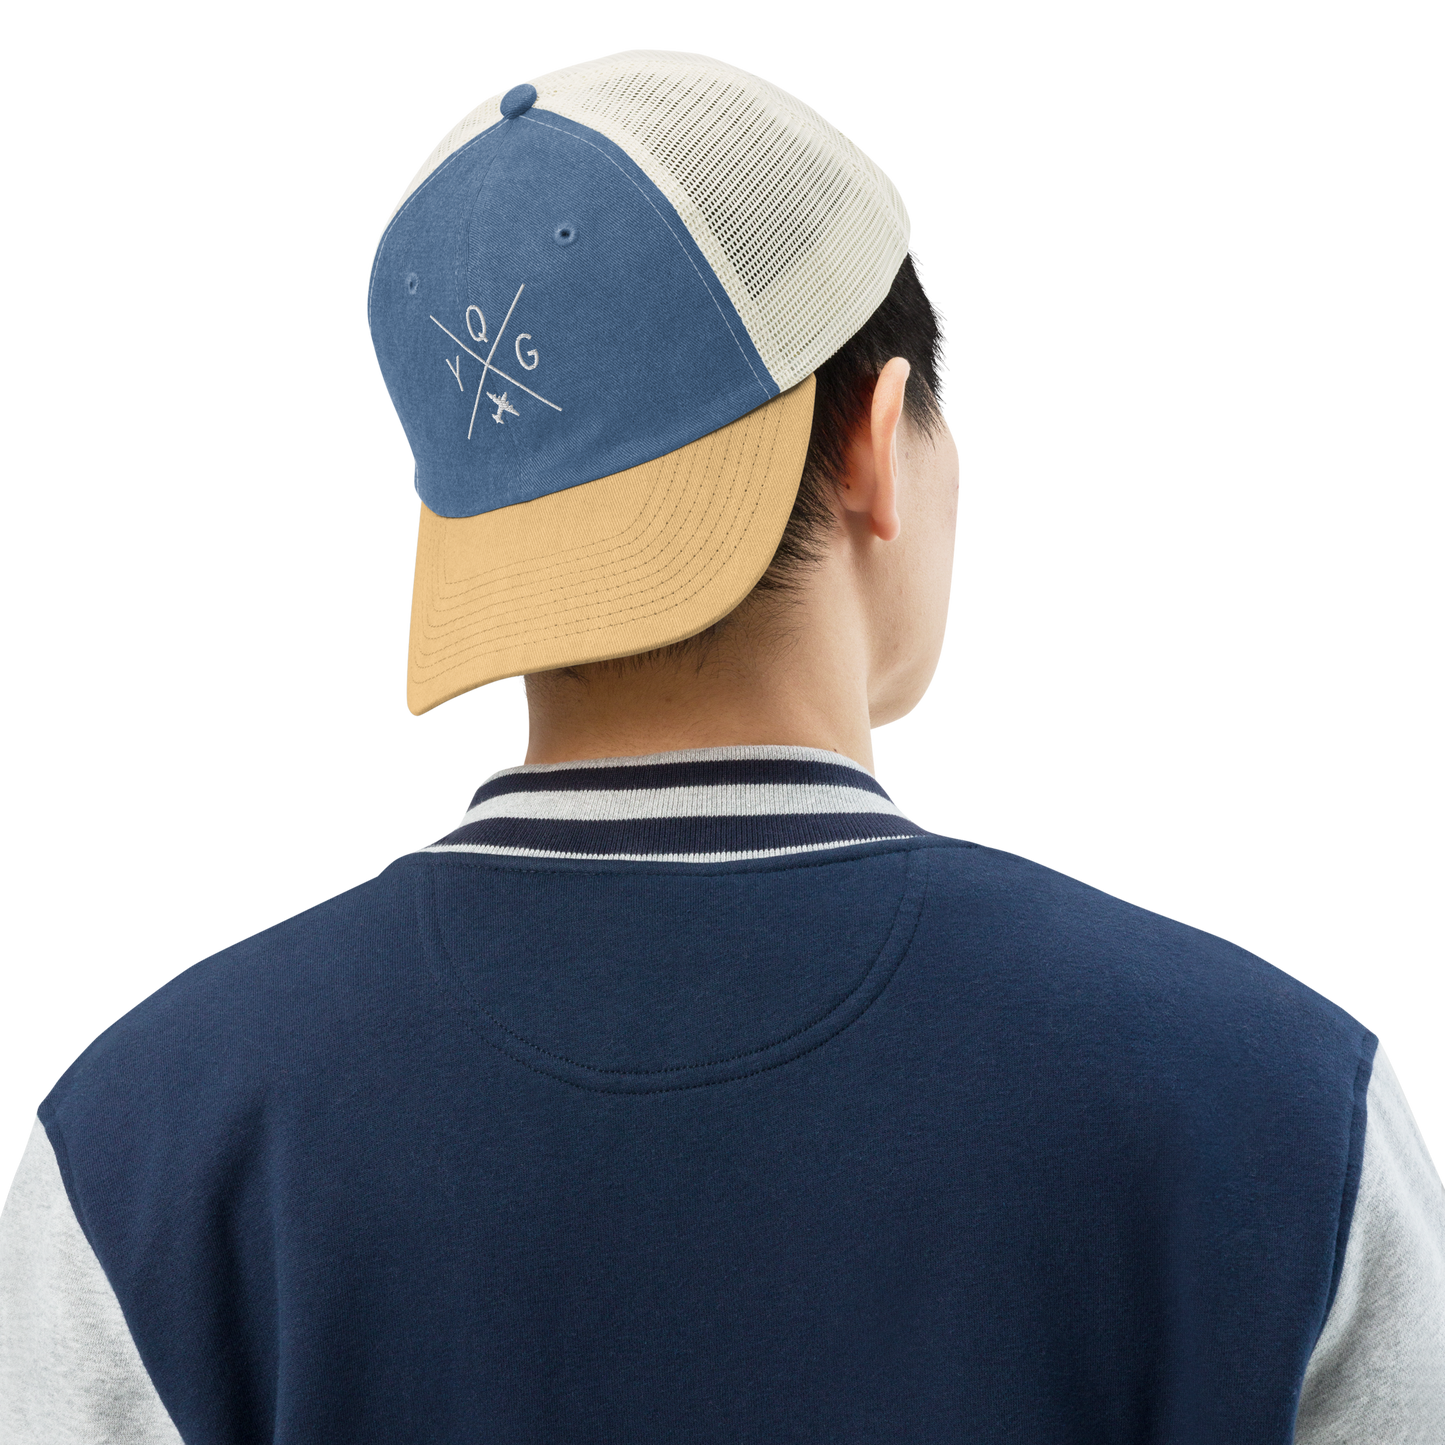 YHM Designs - YQG Windsor Pigment-Dyed Trucker Cap - Crossed-X Design with Airport Code and Vintage Propliner - White Embroidery - Image 04